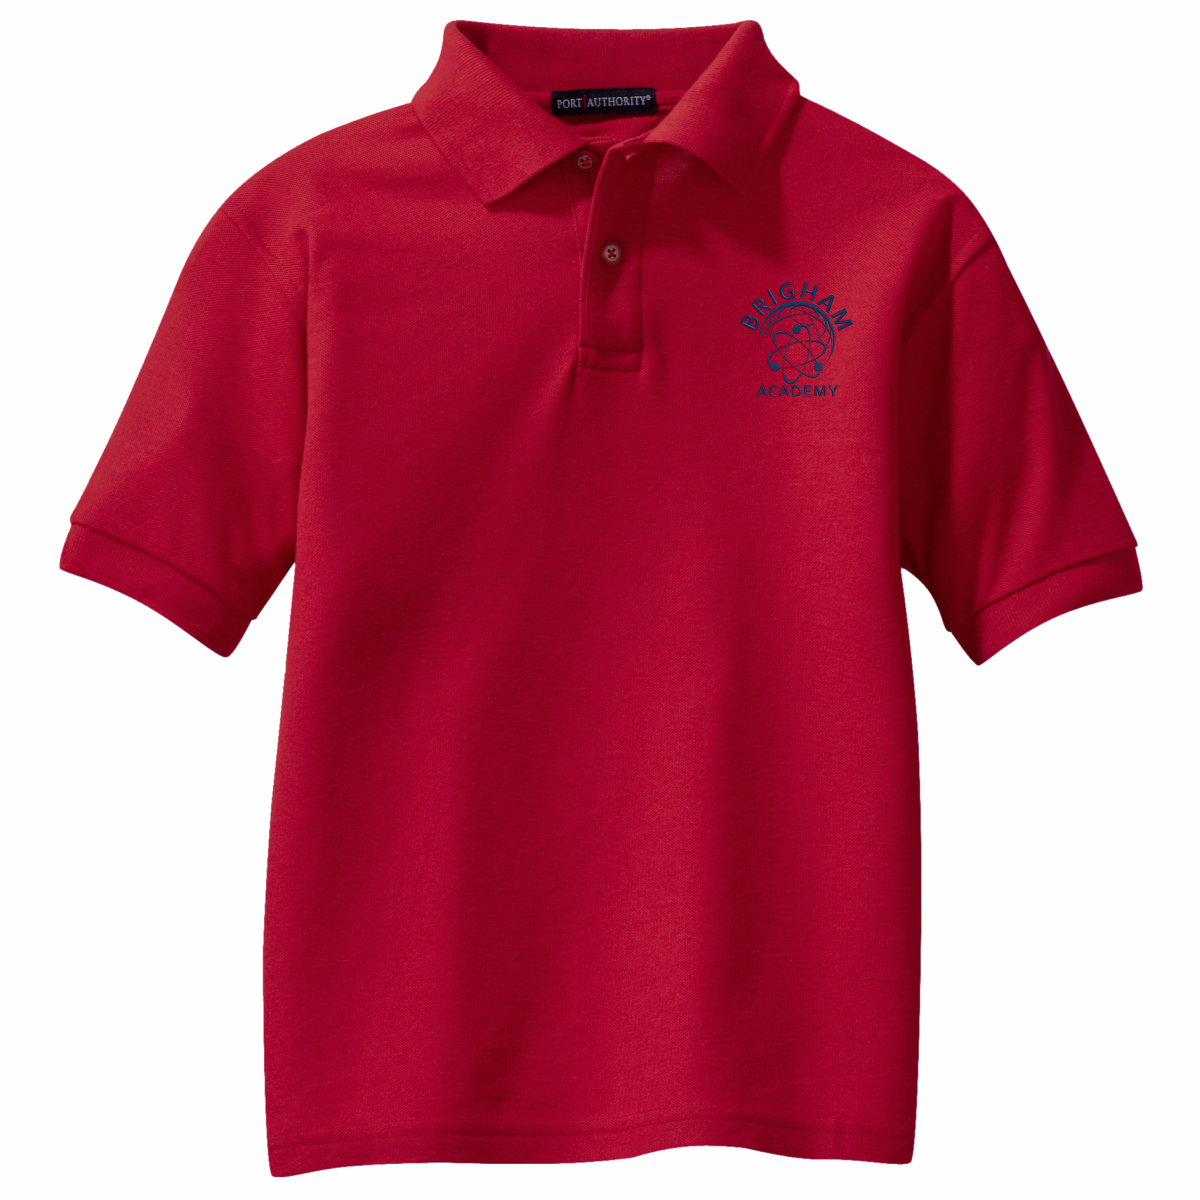 Brigham Academy ADULT SIZE - Port Authority® Classic Pique Polo - RED